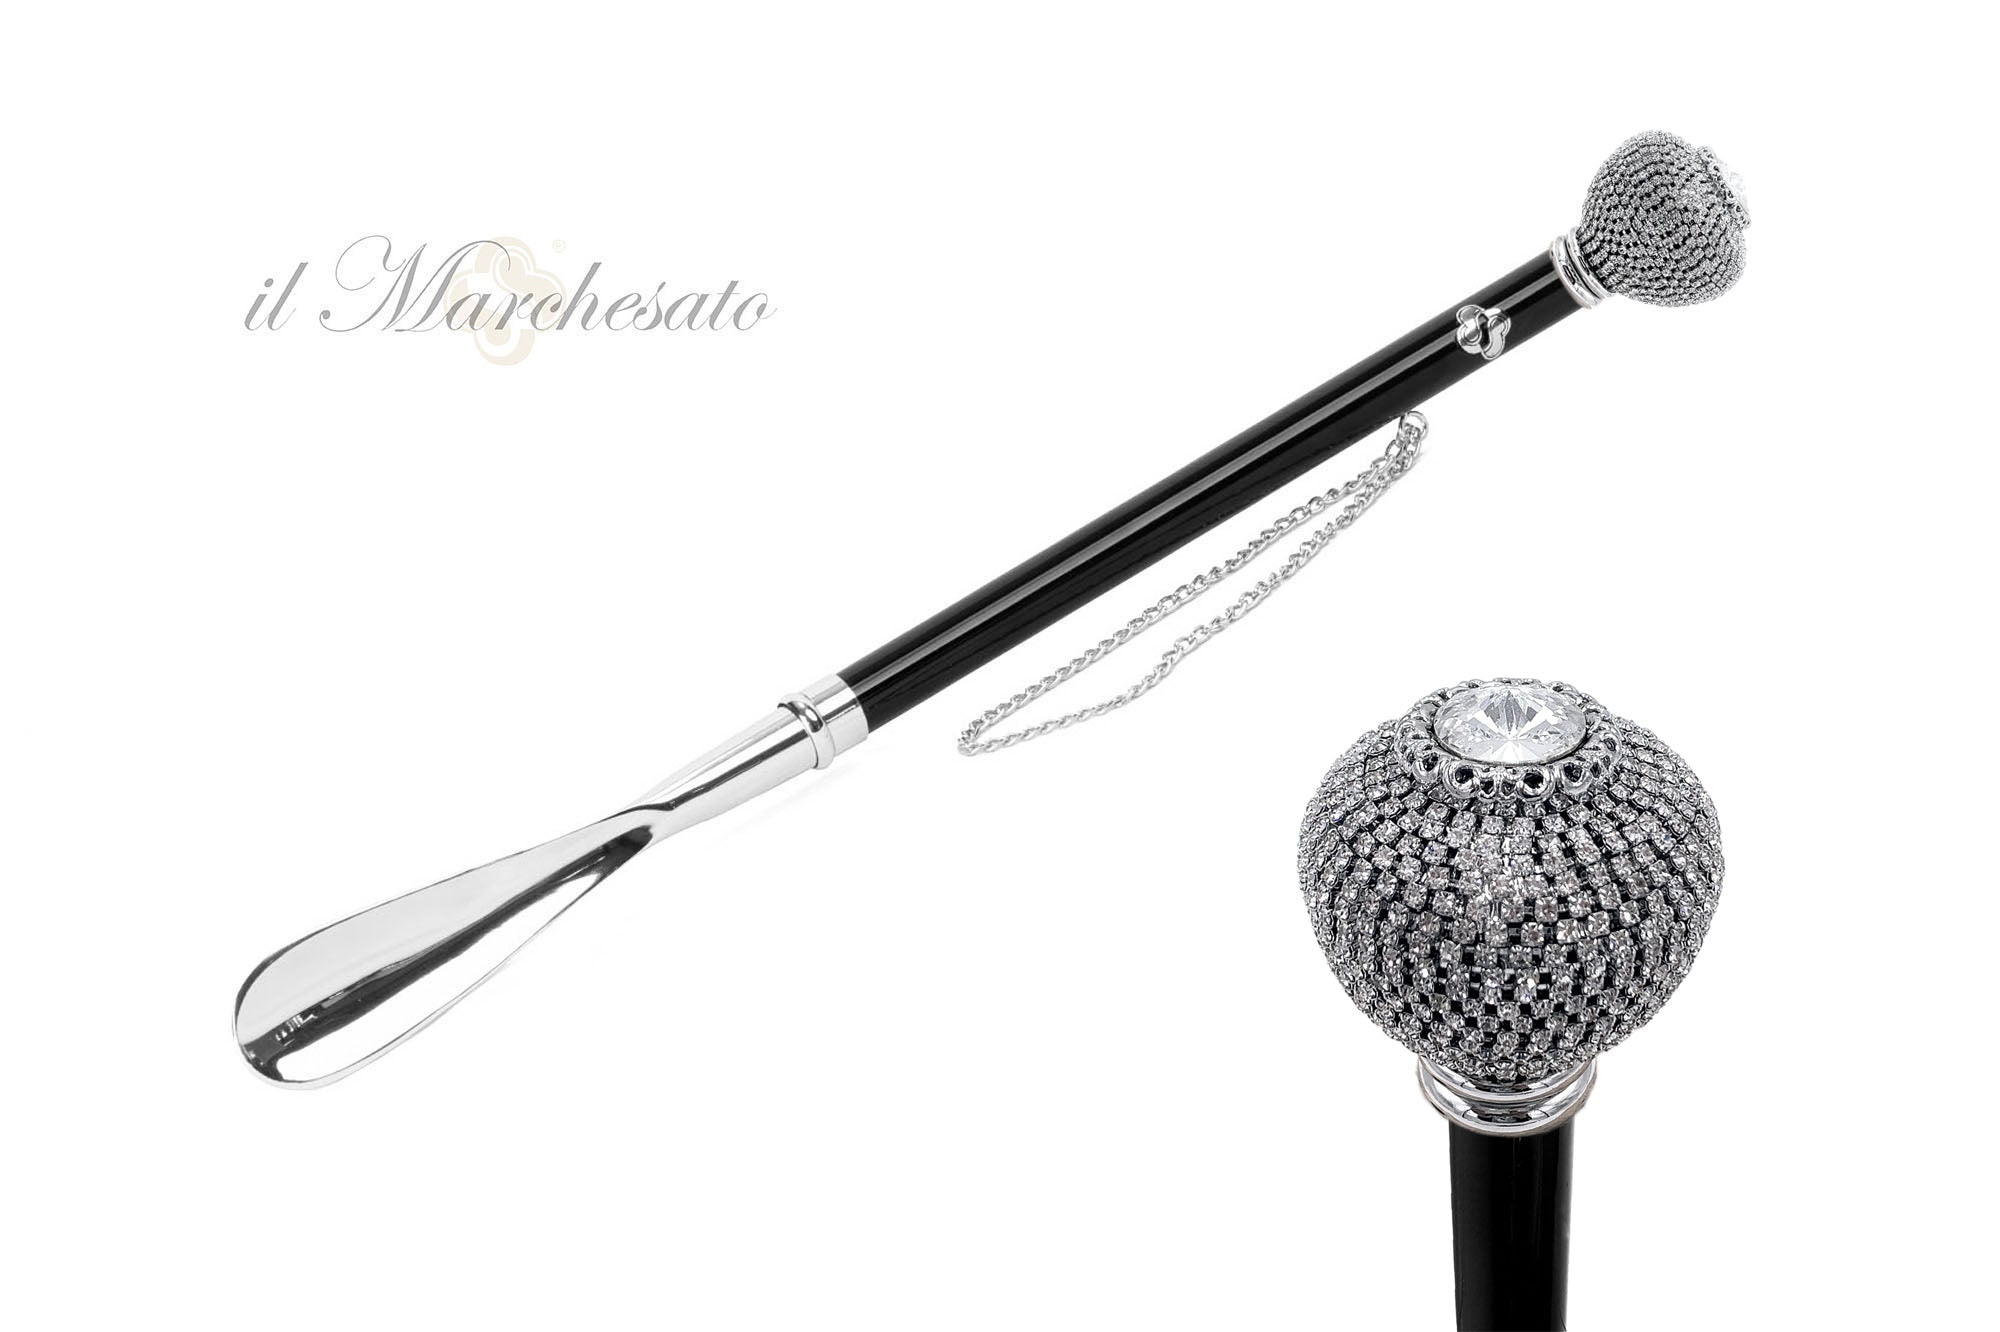 Silverplated shoehorn full of crystals